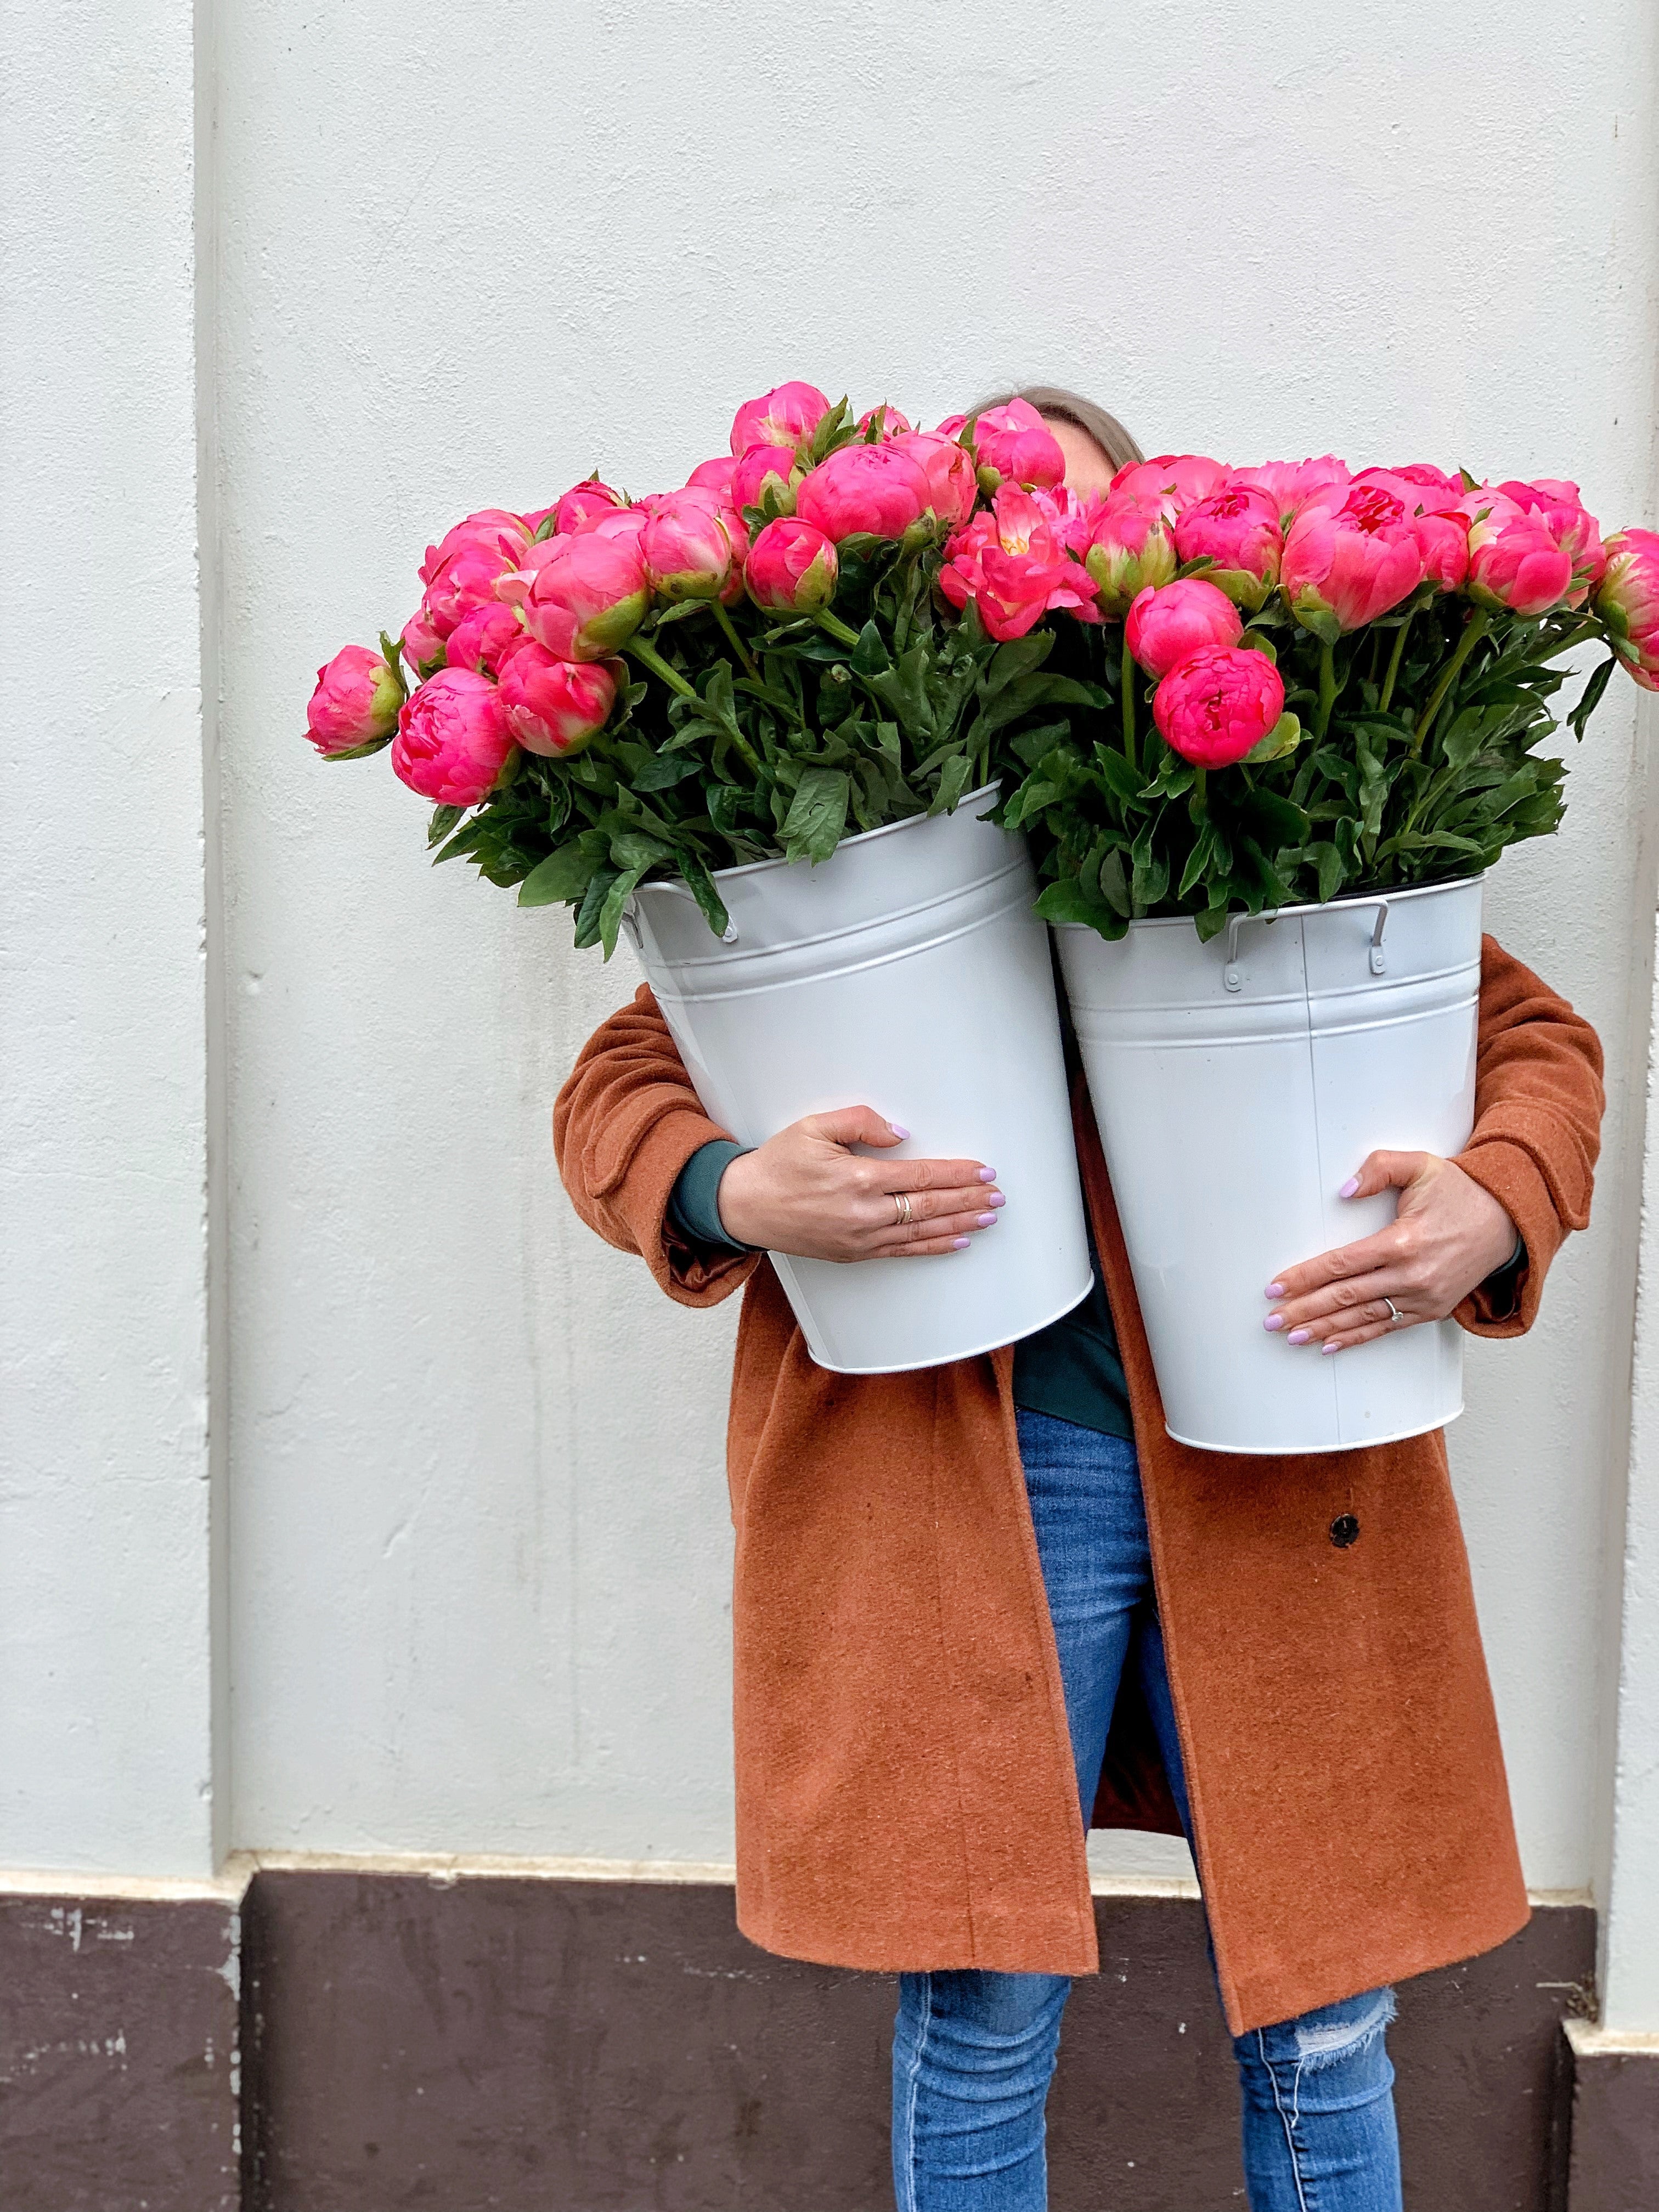 Lady holding two large white metal buckets that are full of deep pink peonies, so big we can't see her face